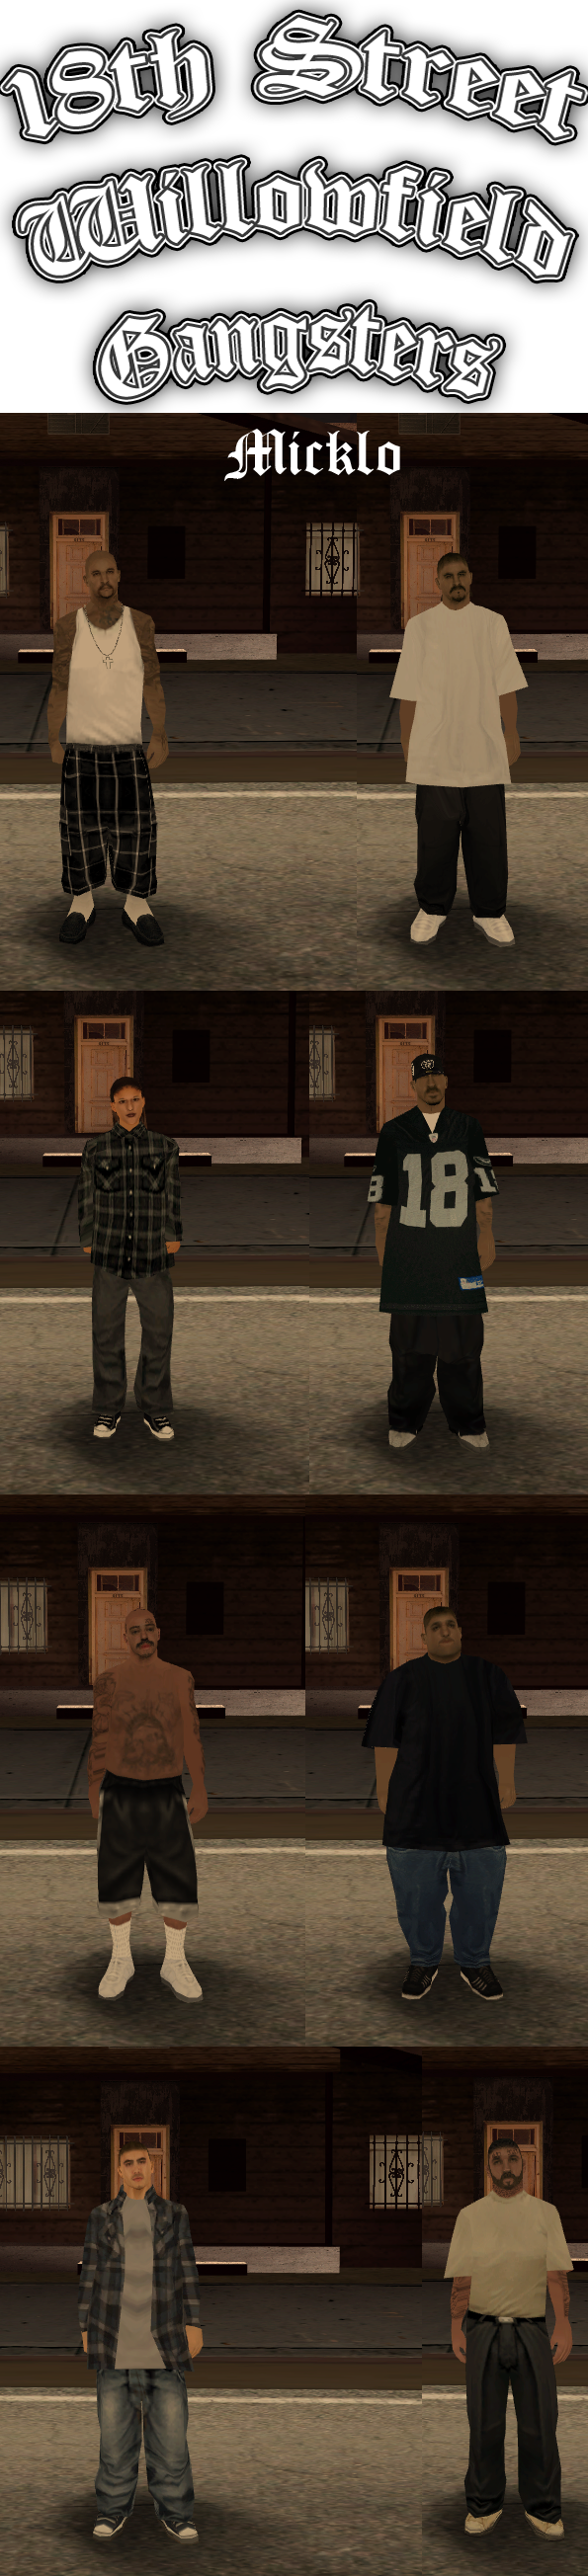 [OFFICIAL] 18th Street Willowfield Gangsters 18th_Street_Willowfield_Gangsters_Micklo